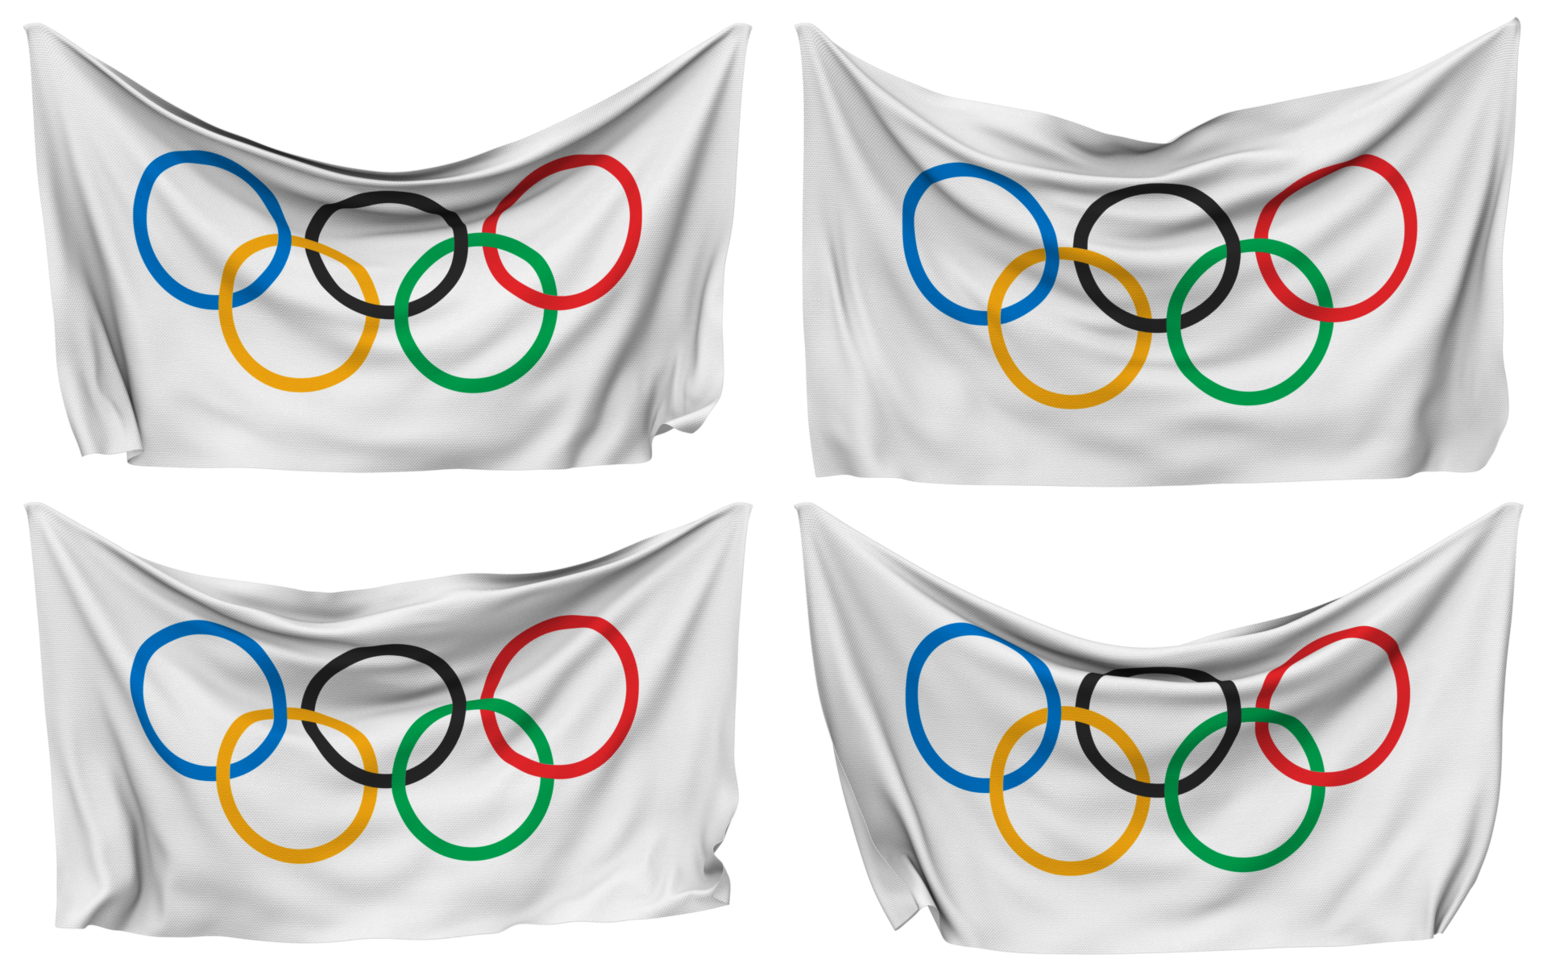 Olympic Games, Olympics Pinned Flag from Corners, Isolated with Different Waving Variations, 3D Rendering png